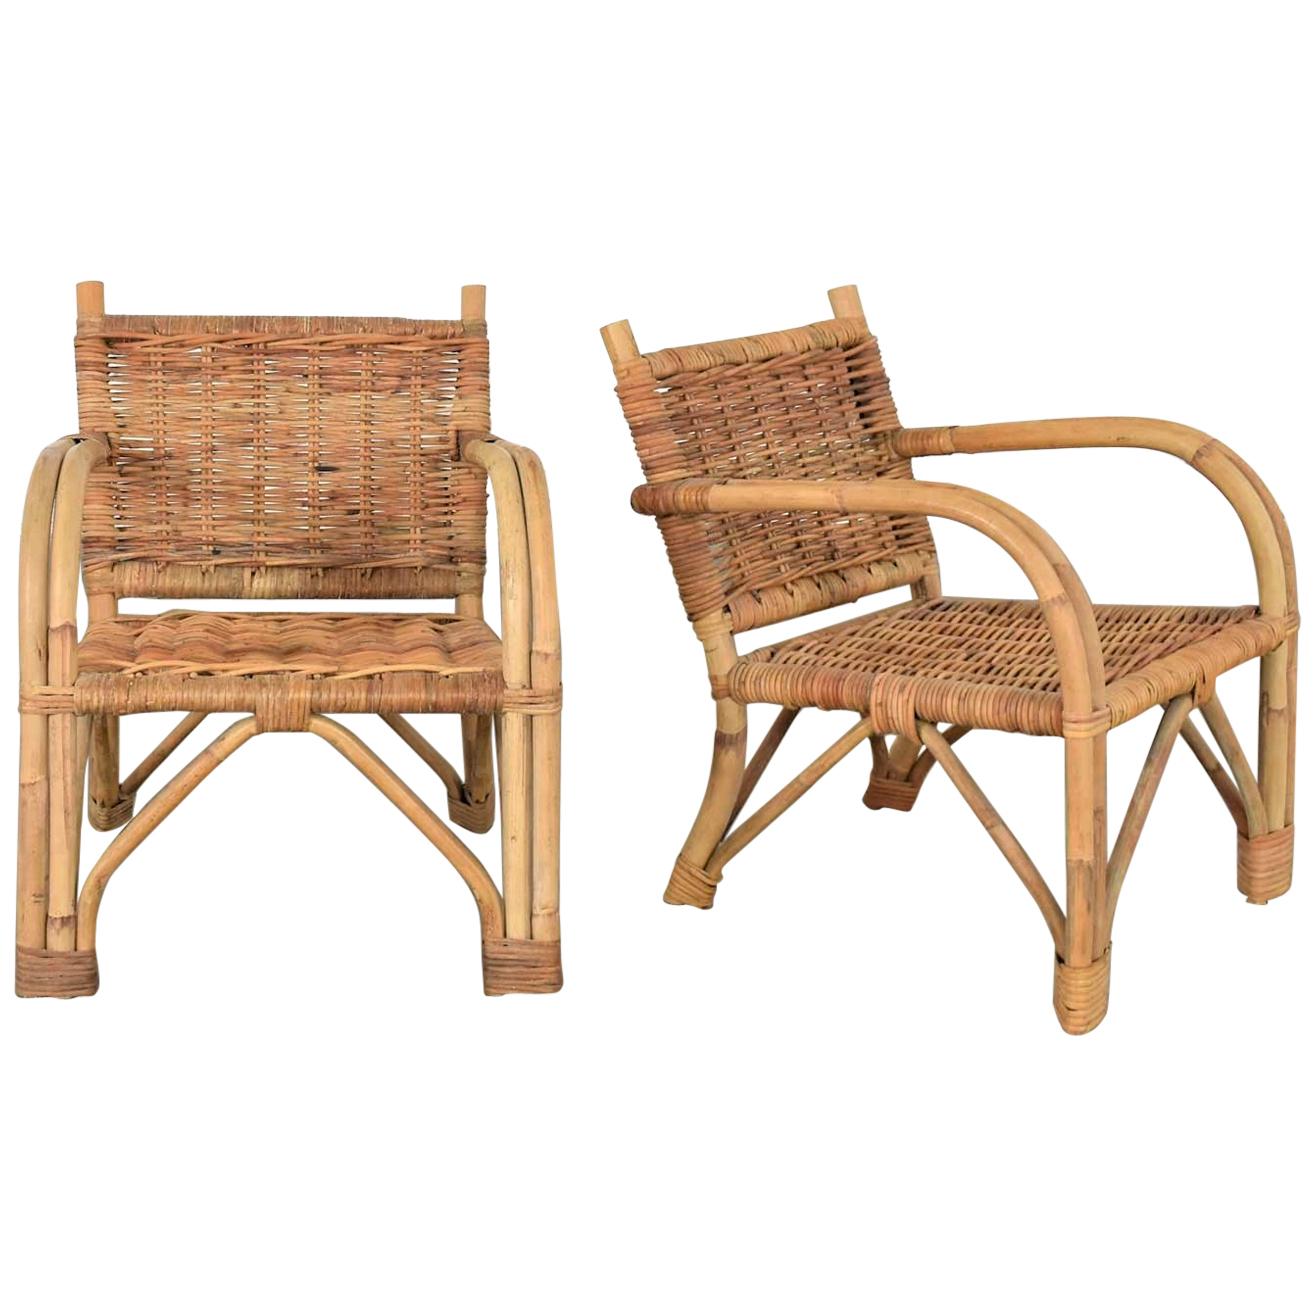 Children’s Rattan and Wicker Chairs with Bent Arms Vintage Pair, 1930-1960